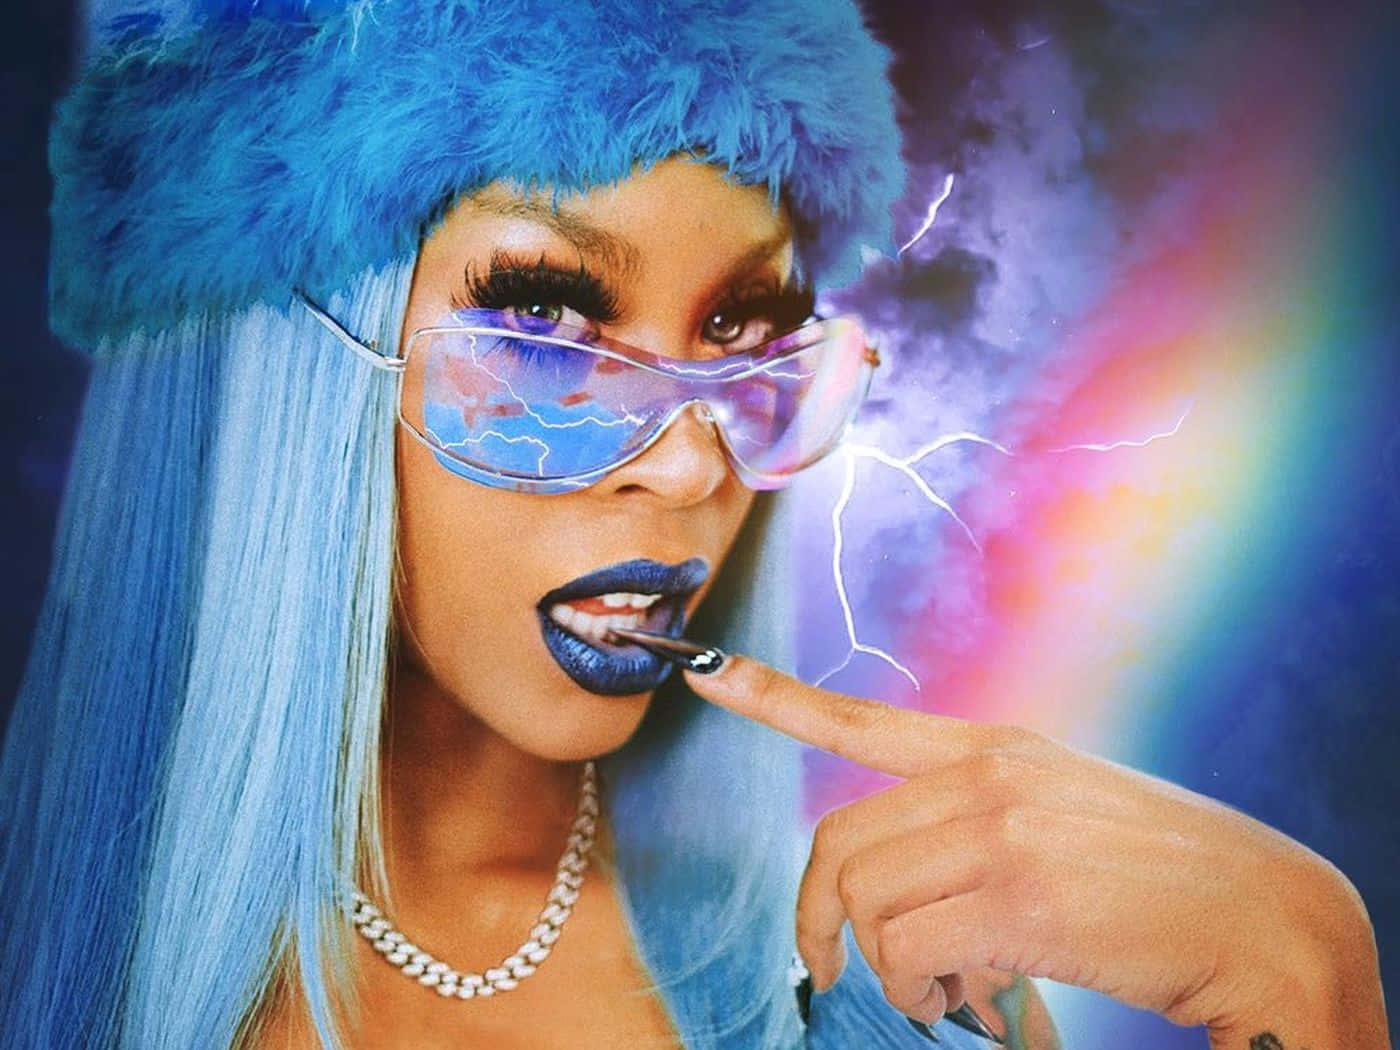 Singer and Rapper Rico Nasty posing for a photo. Wallpaper